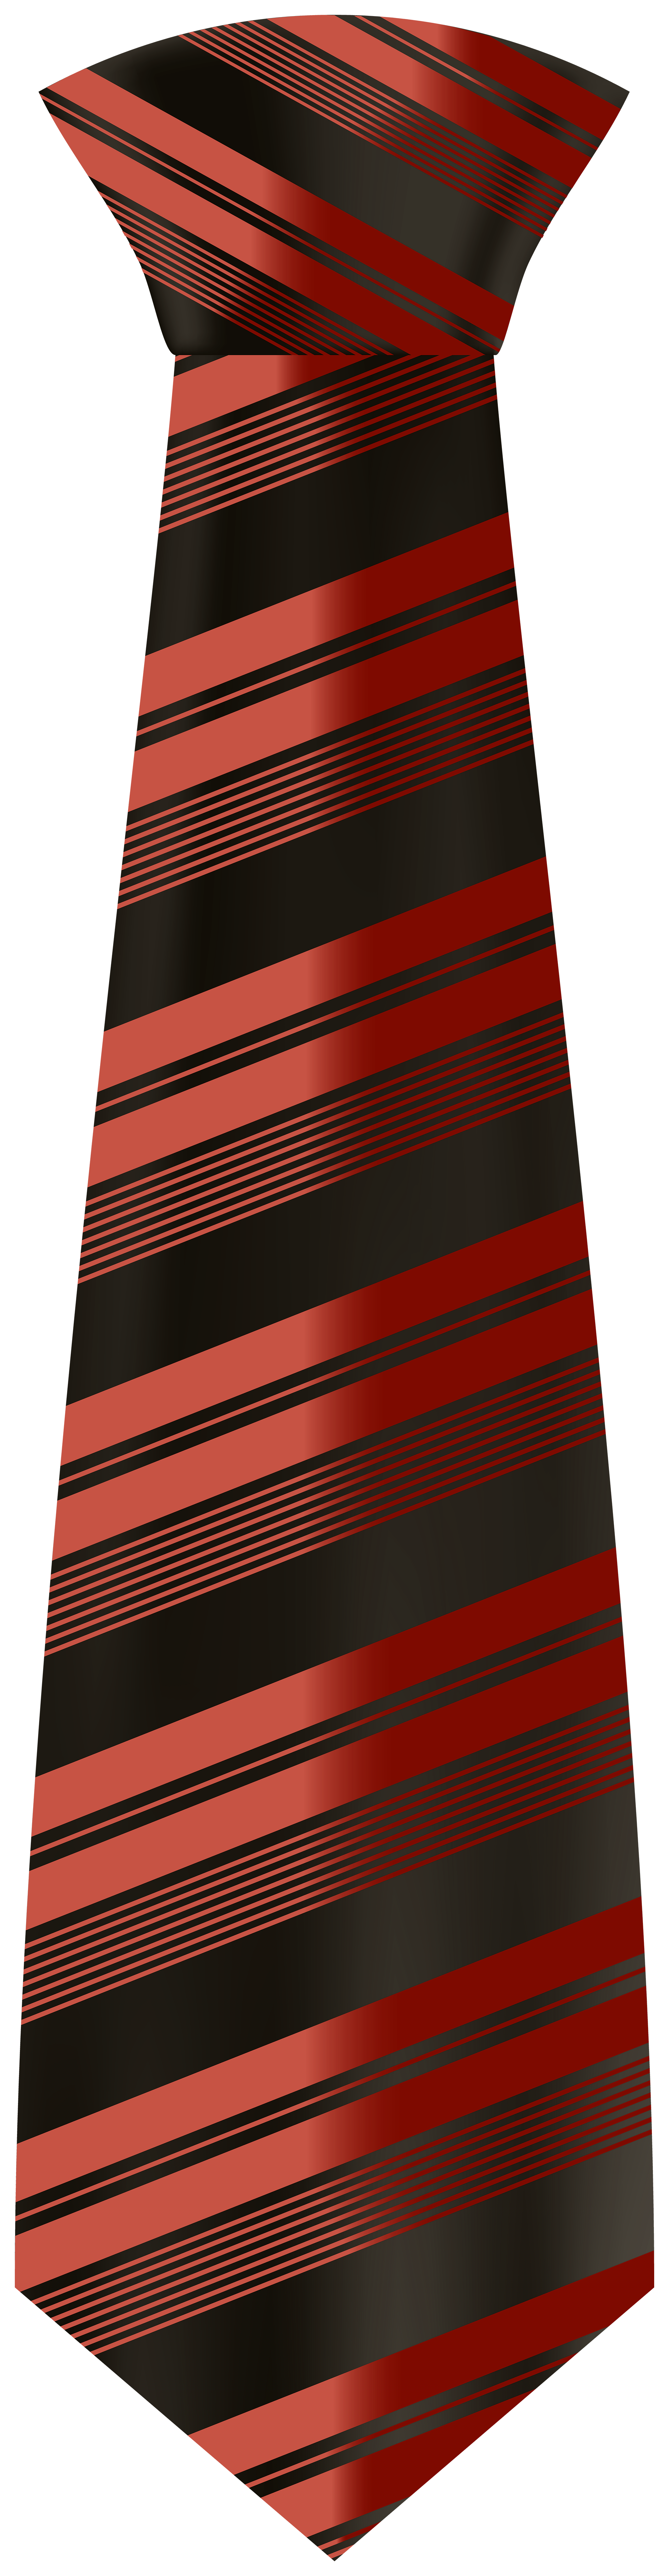 Red Tie with Stripes PNG Clipart​